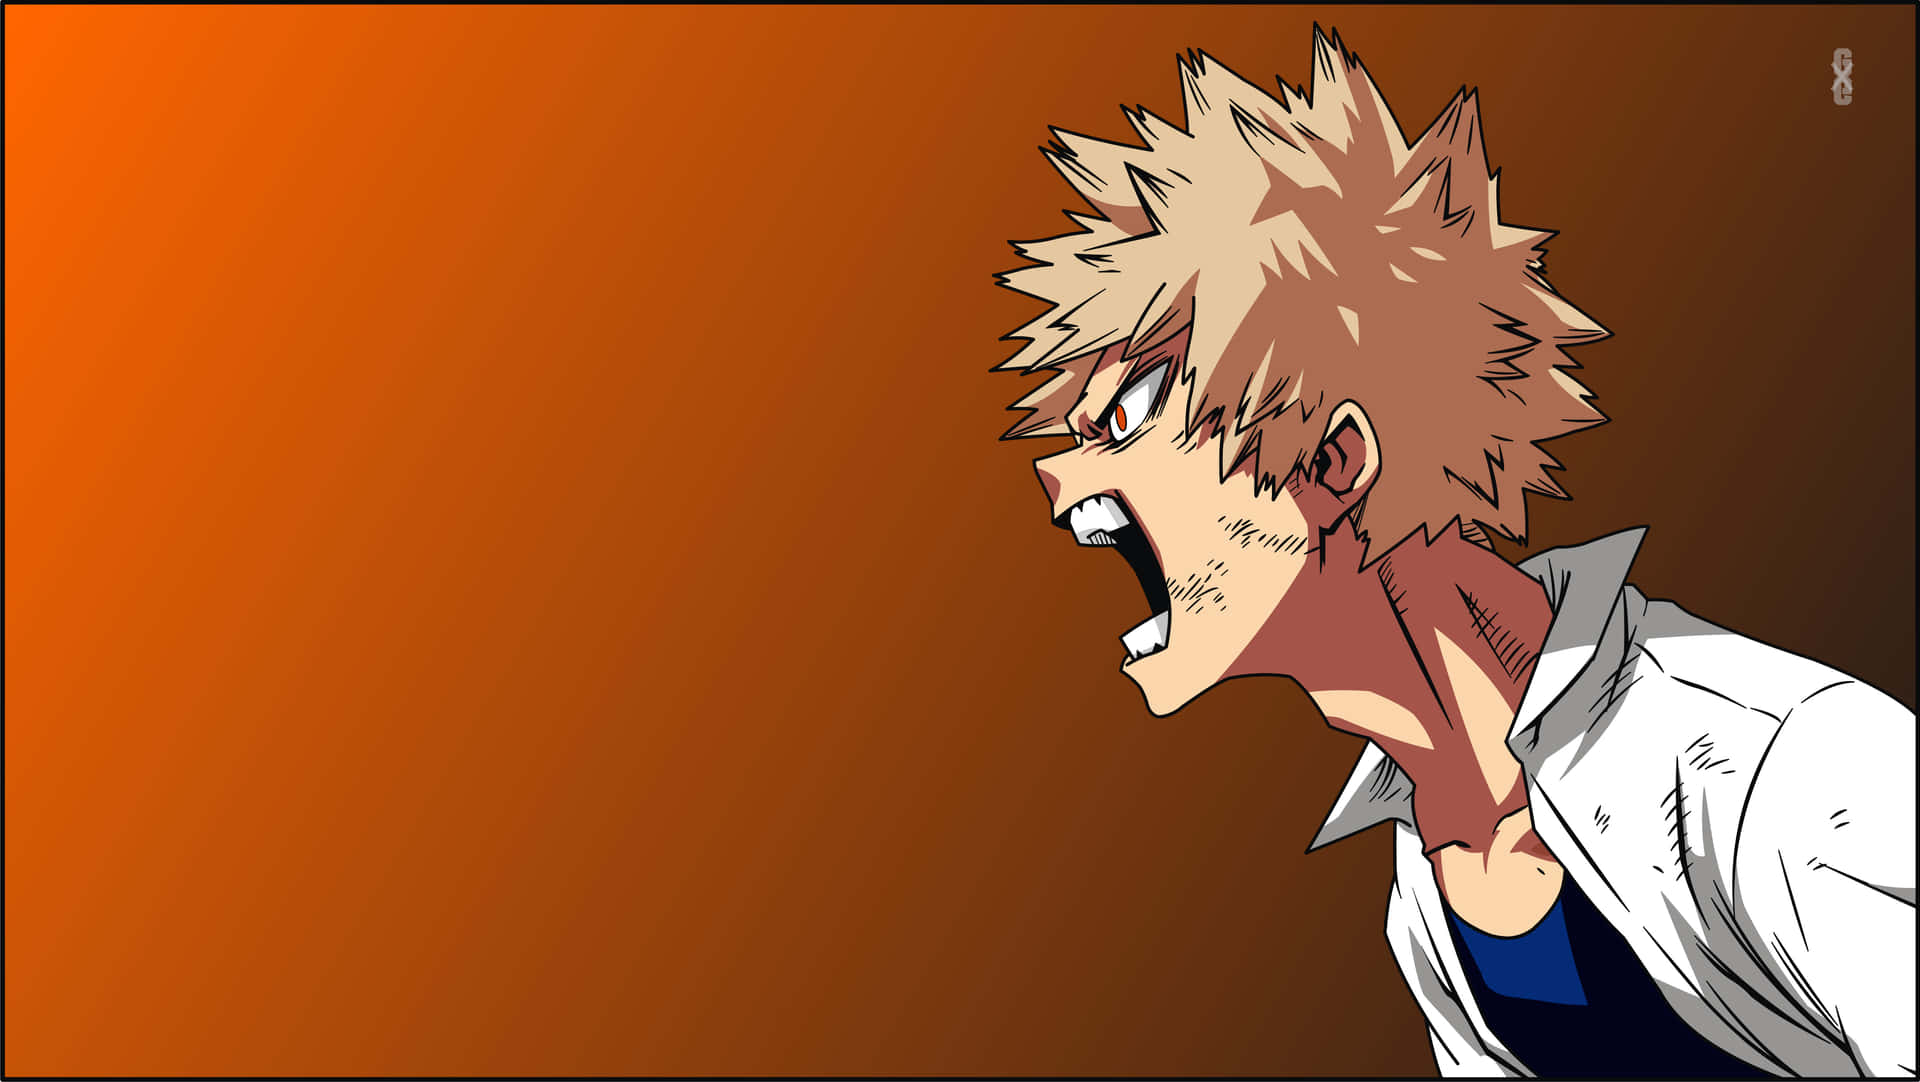 "Be the hero you want to be with the My Hero Academia Laptop!" Wallpaper